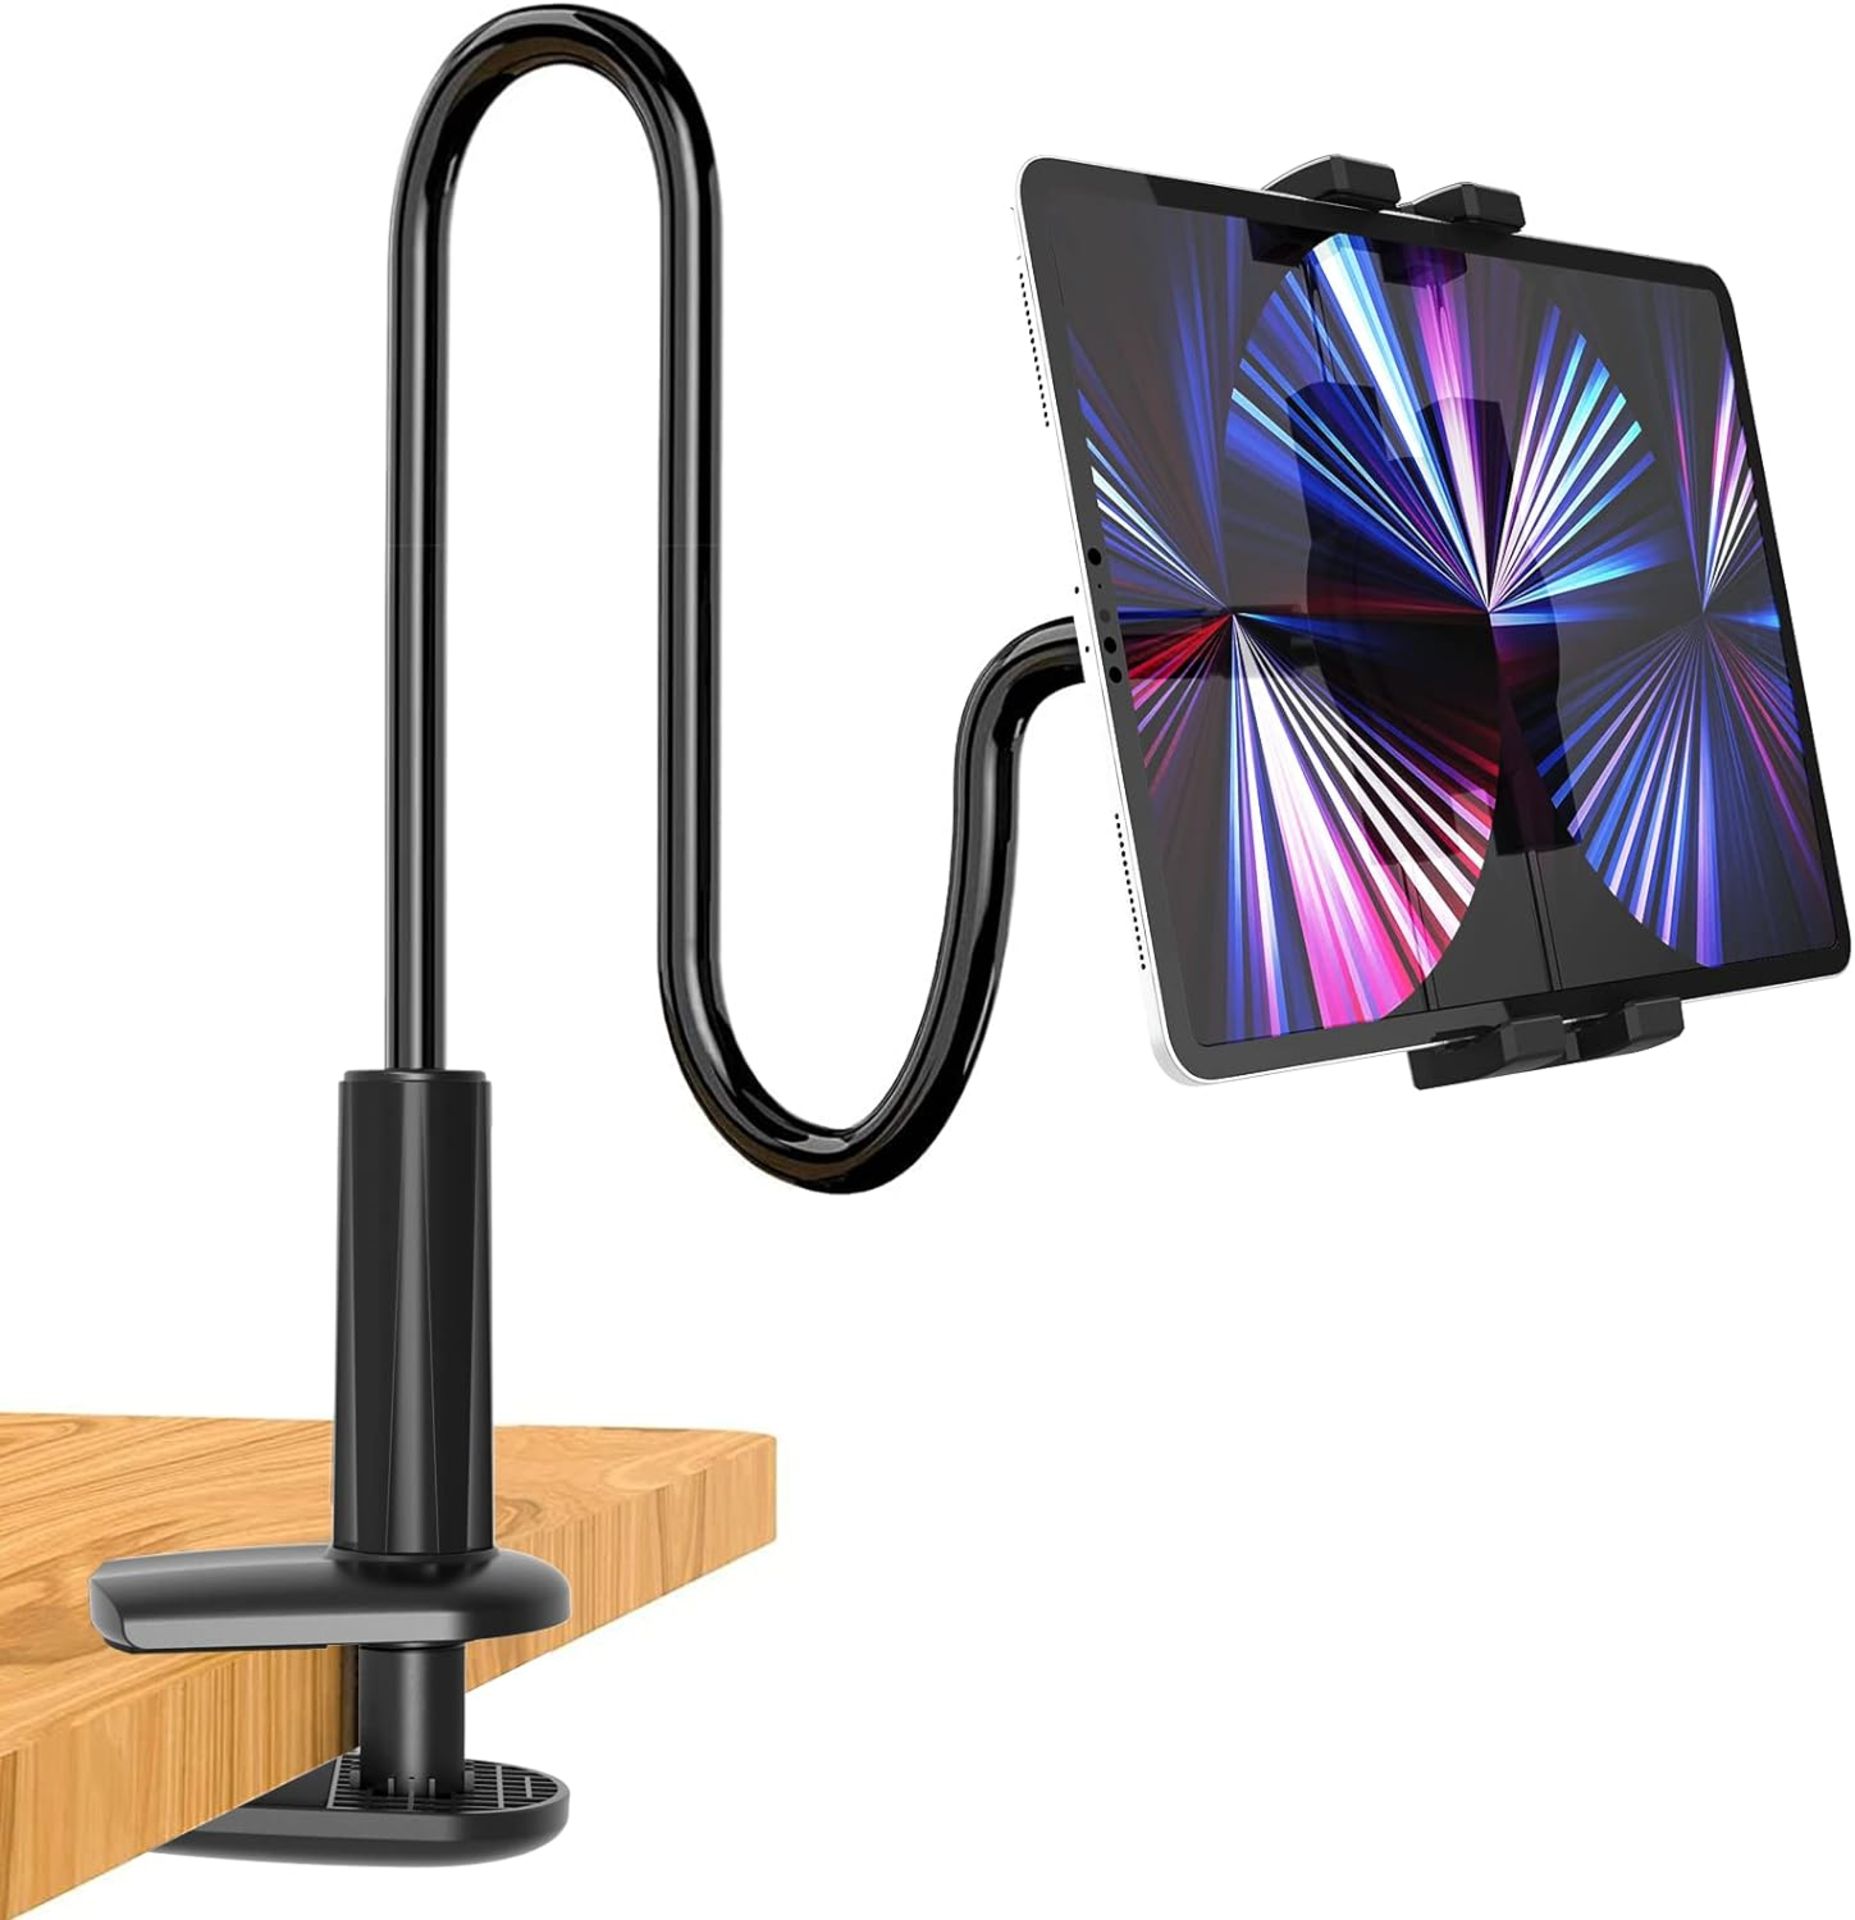 RRP £24.99 Oilcan Flexible Arm Tablet/ Phone Holder Stand for Bed Table, Gooseneck Desk iPad